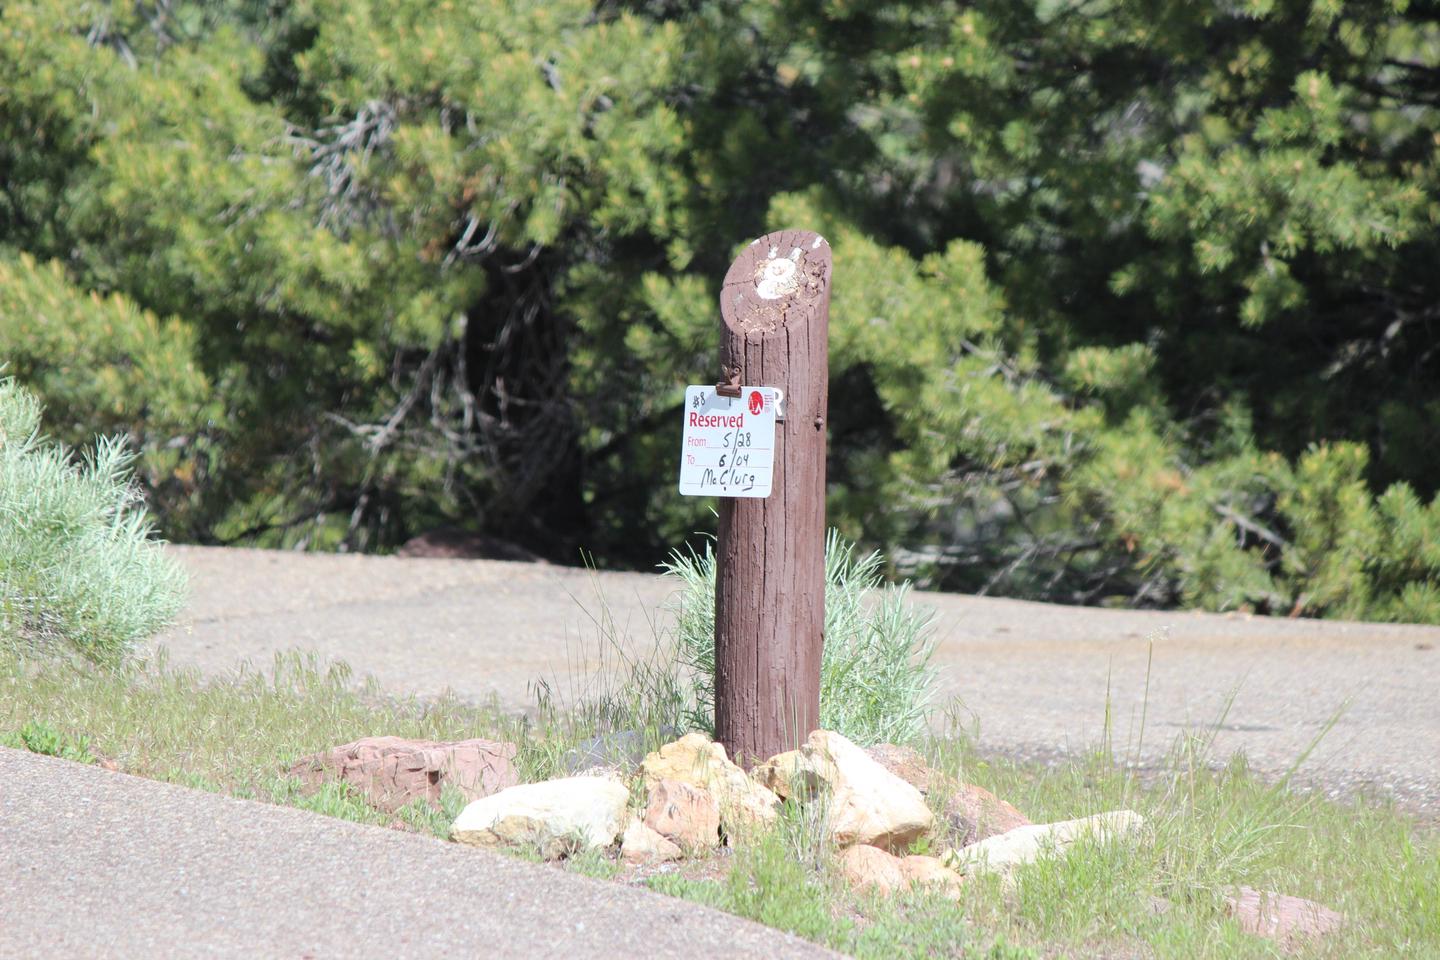 Post at the entrance of the site that shows it being reserved.Cedar Springs Campground: Site 8